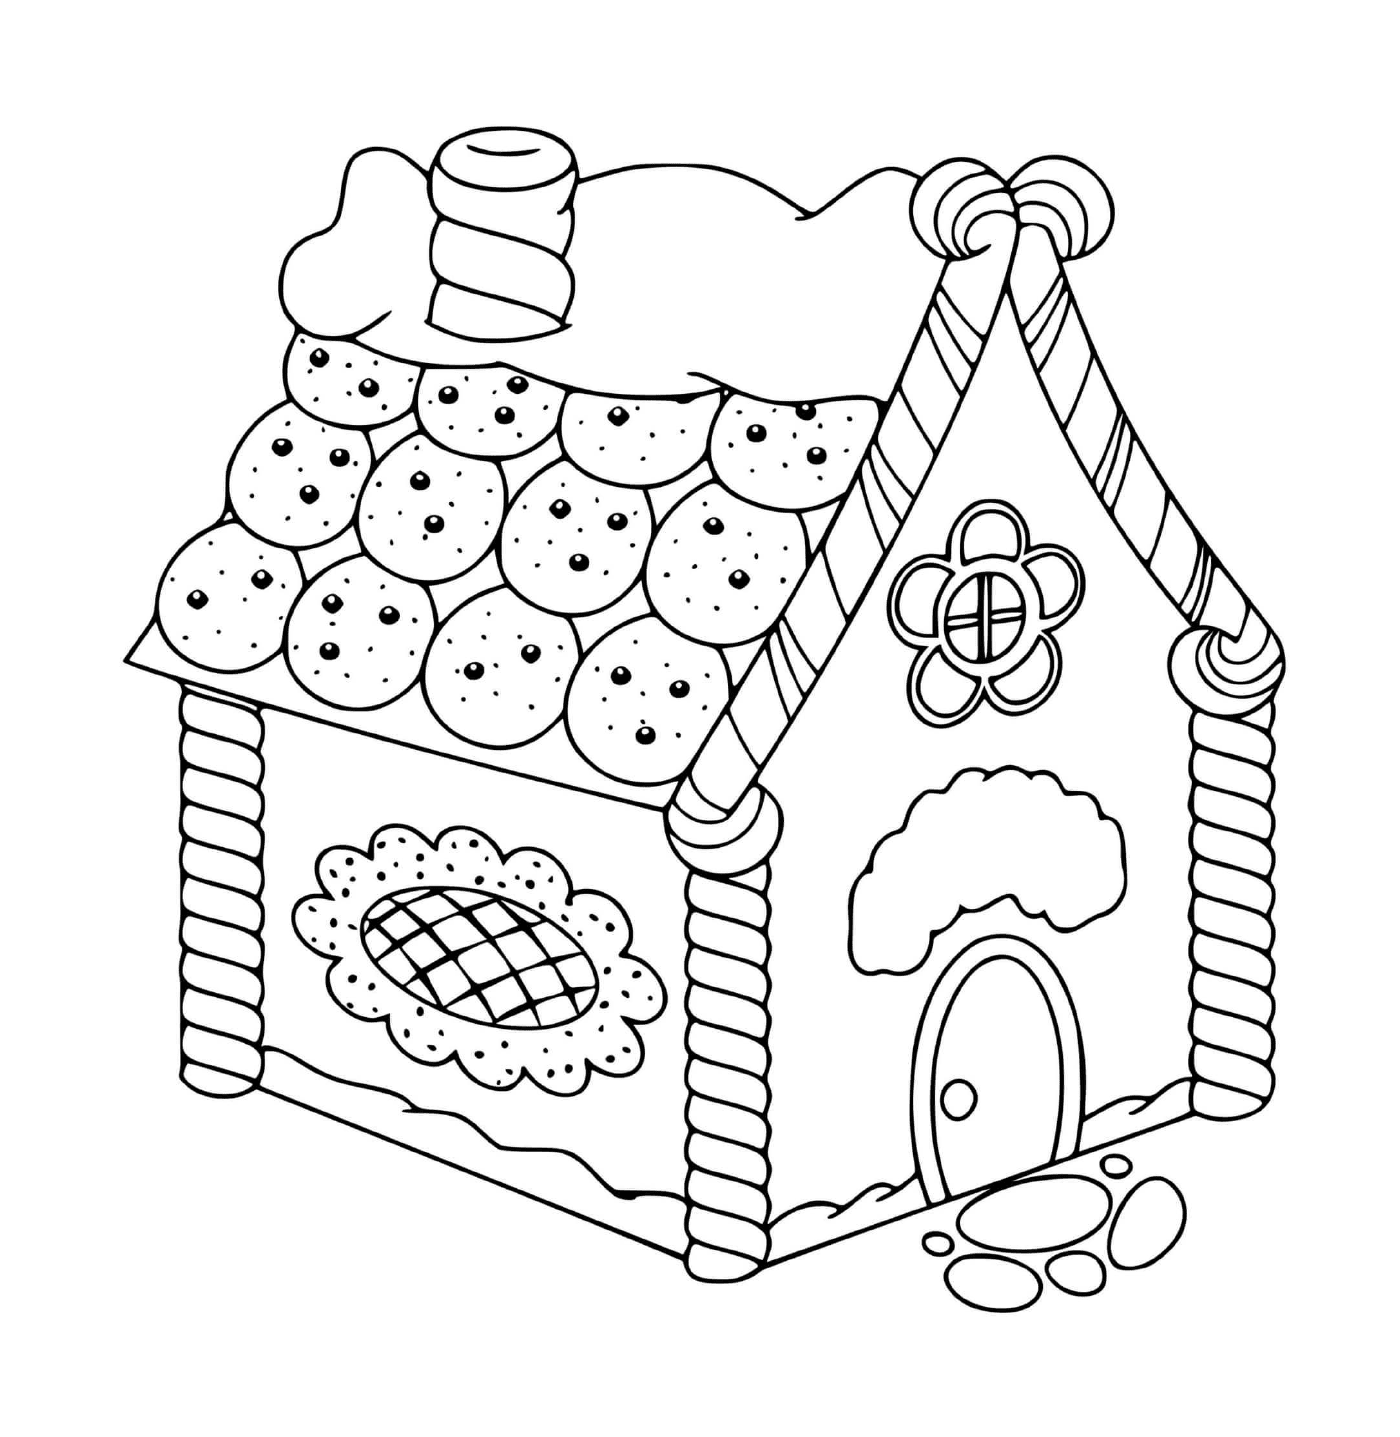  Charming gingerbread house 